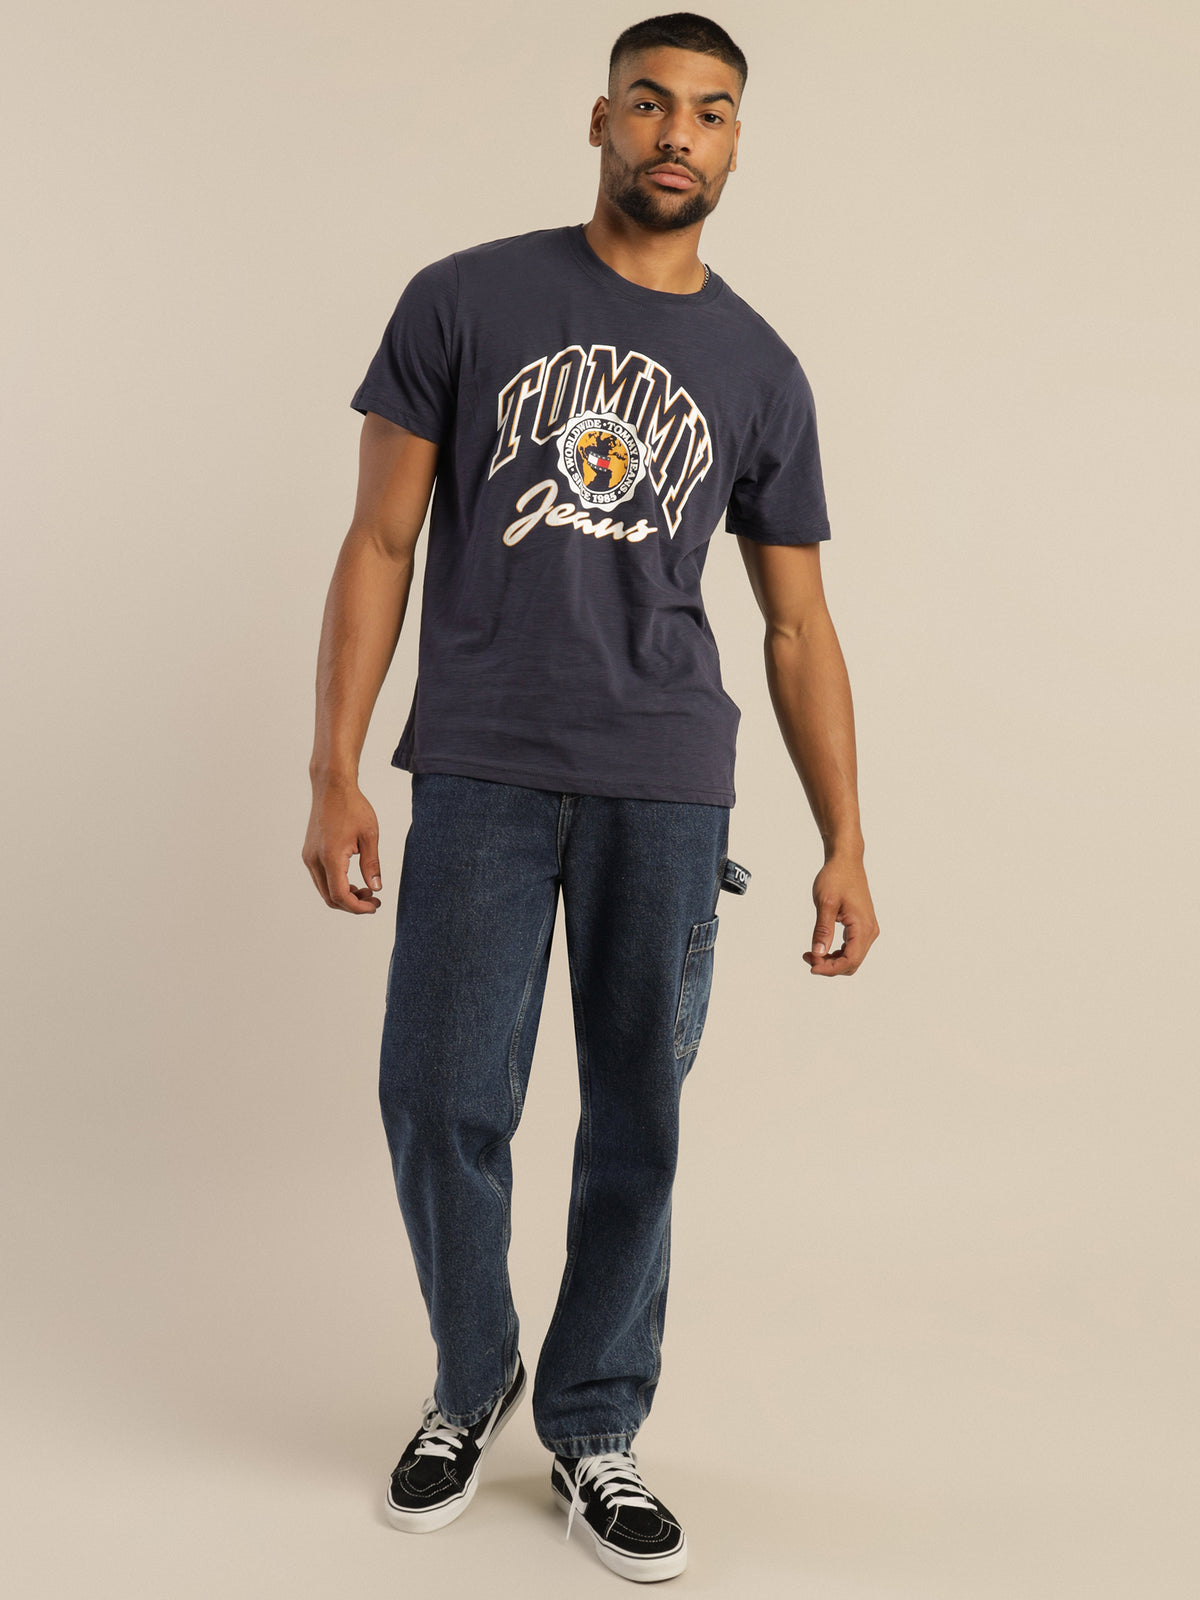 Bold College Graphic T-Shirt in Twilight Navy